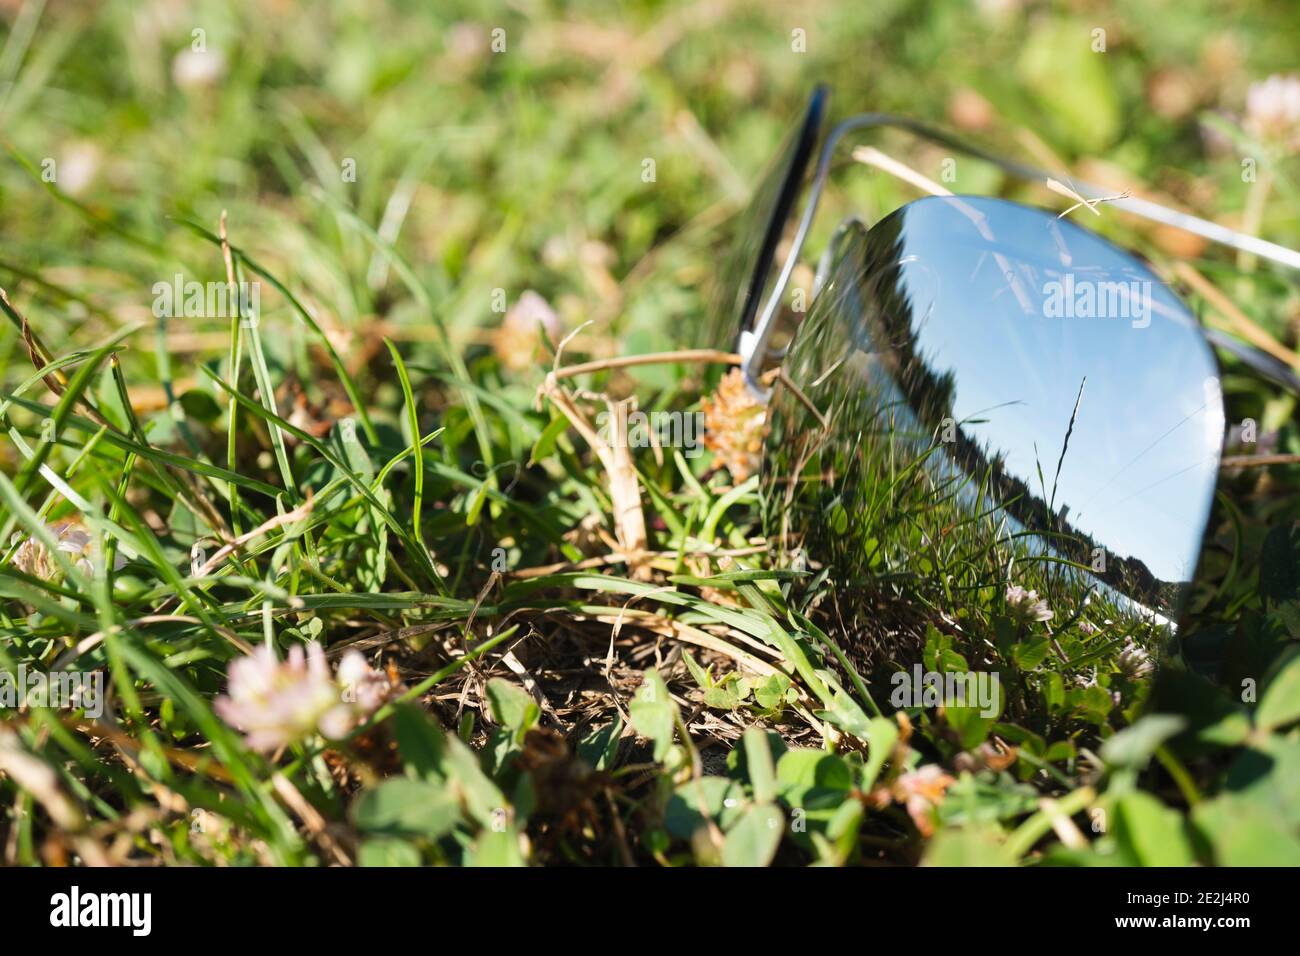 Sunglasses on the green grass. The glasses reflect a clear summer day with a beautiful landscape. Outdoor recreation concept Stock Photo